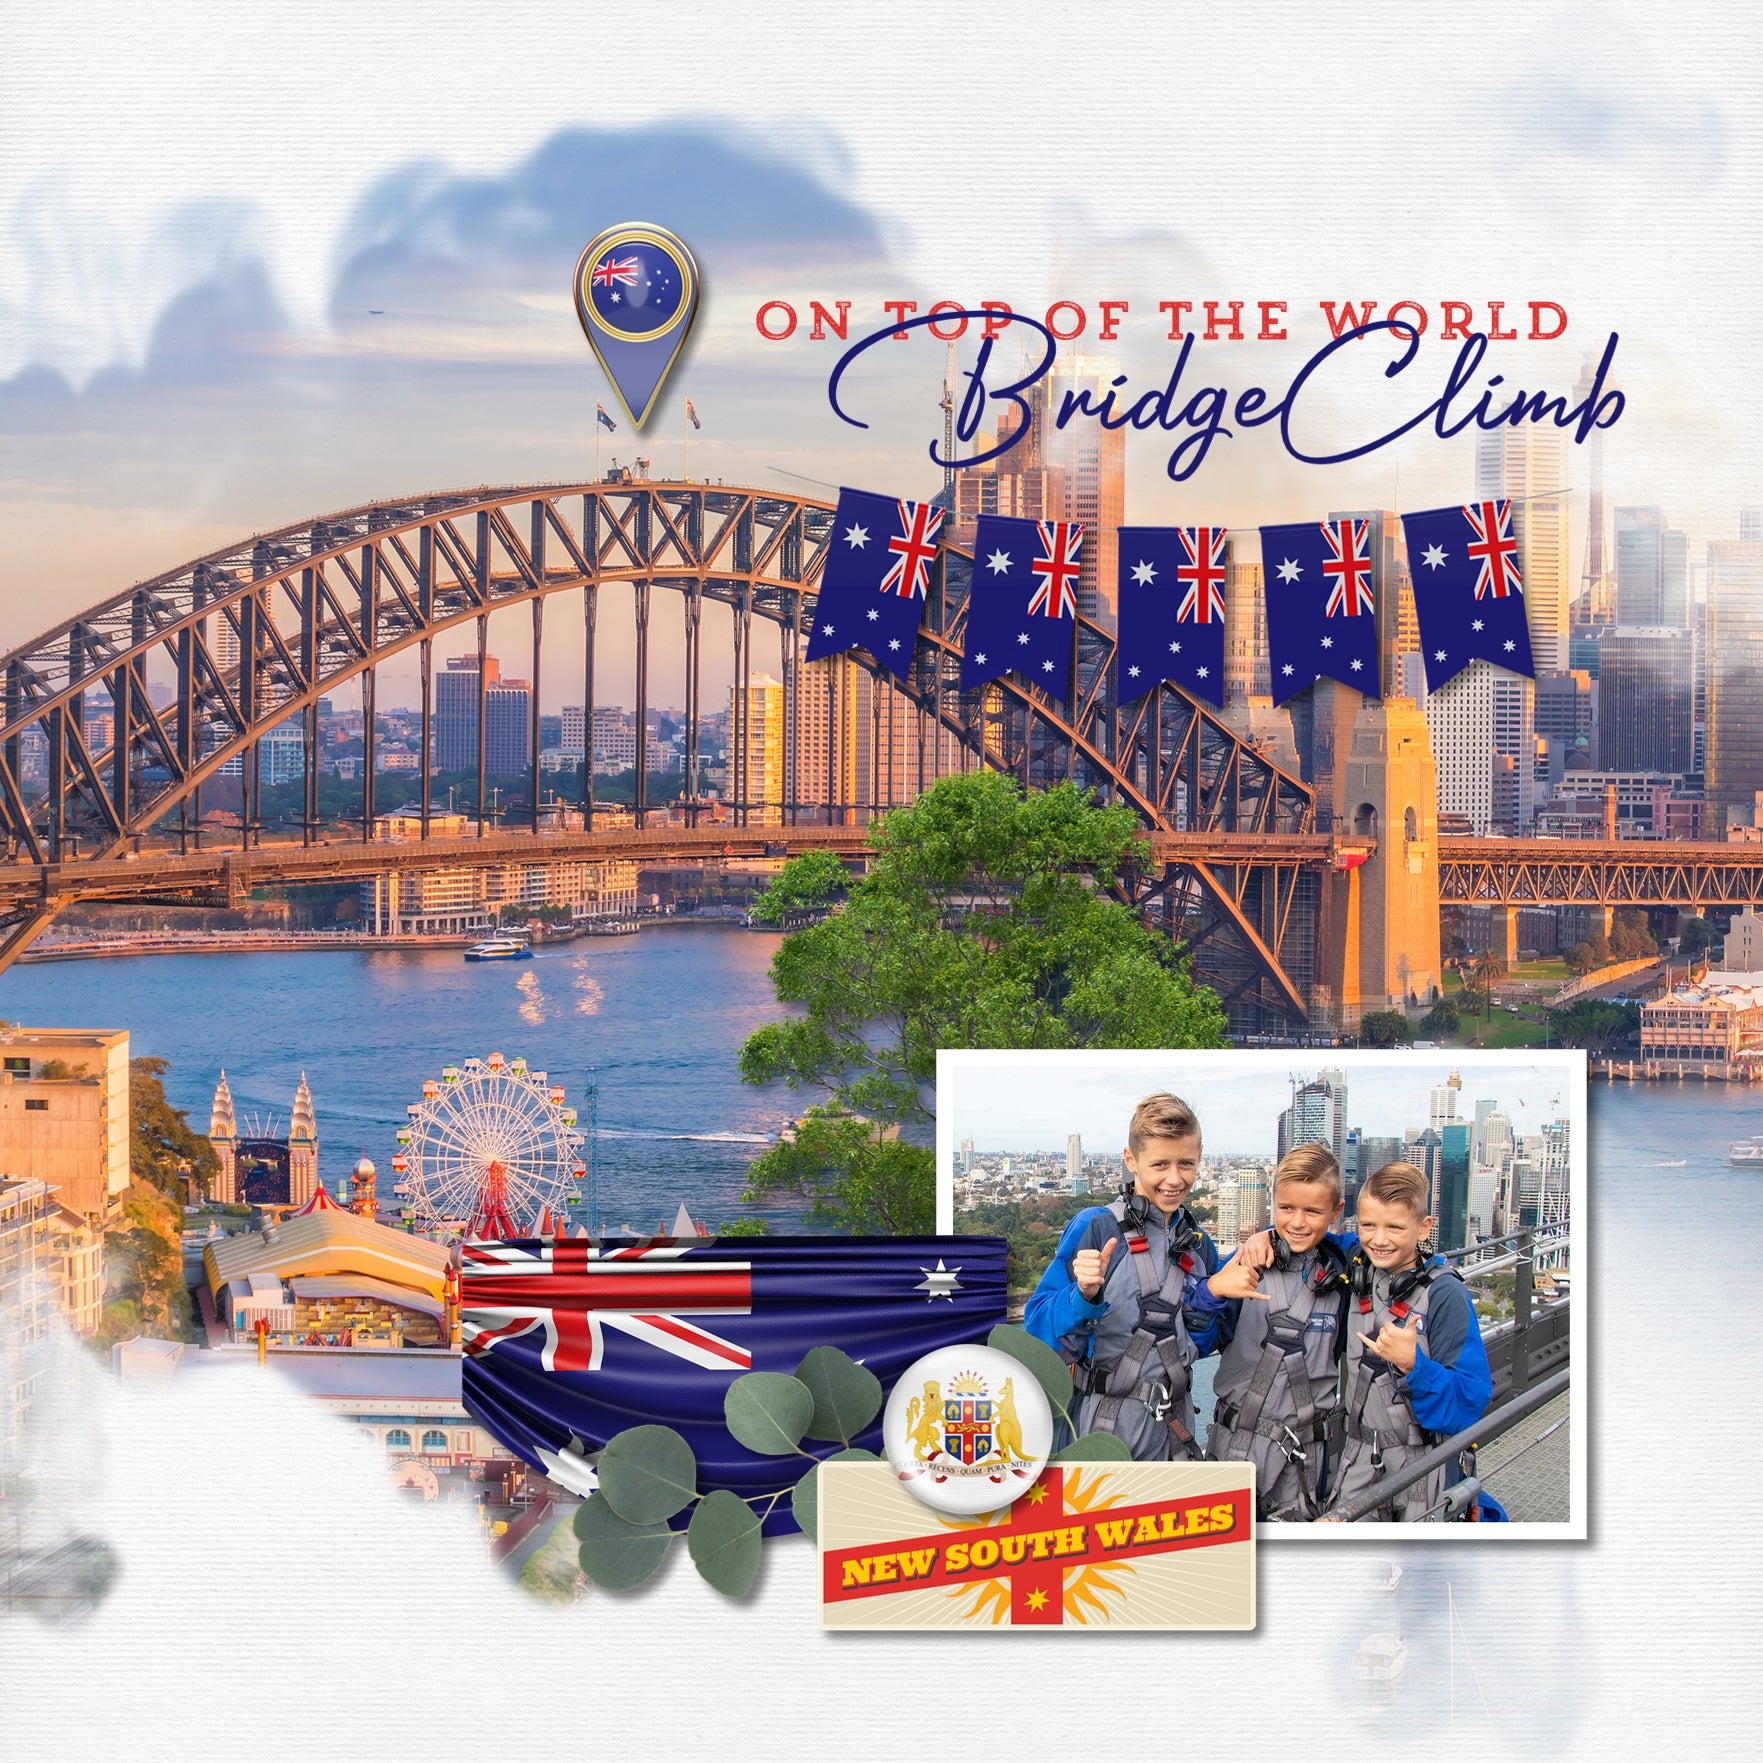 Highlight your vacation memories with these digital scrapbooking art Australian Coat of Arms pieces of flair. Great for holidays to Australia and New Zealand and celebrating your patriotism for your city, state, or territory! Coat of Arms include Adelaide, Australia, Australian Capital Territory, Brisbane, Darwin, Hobart, Melbourne, New South Wales, Northern Territory, Perth, Queensland, South Australia, Sydney, Tasmania, Victoria, and Western Australia.